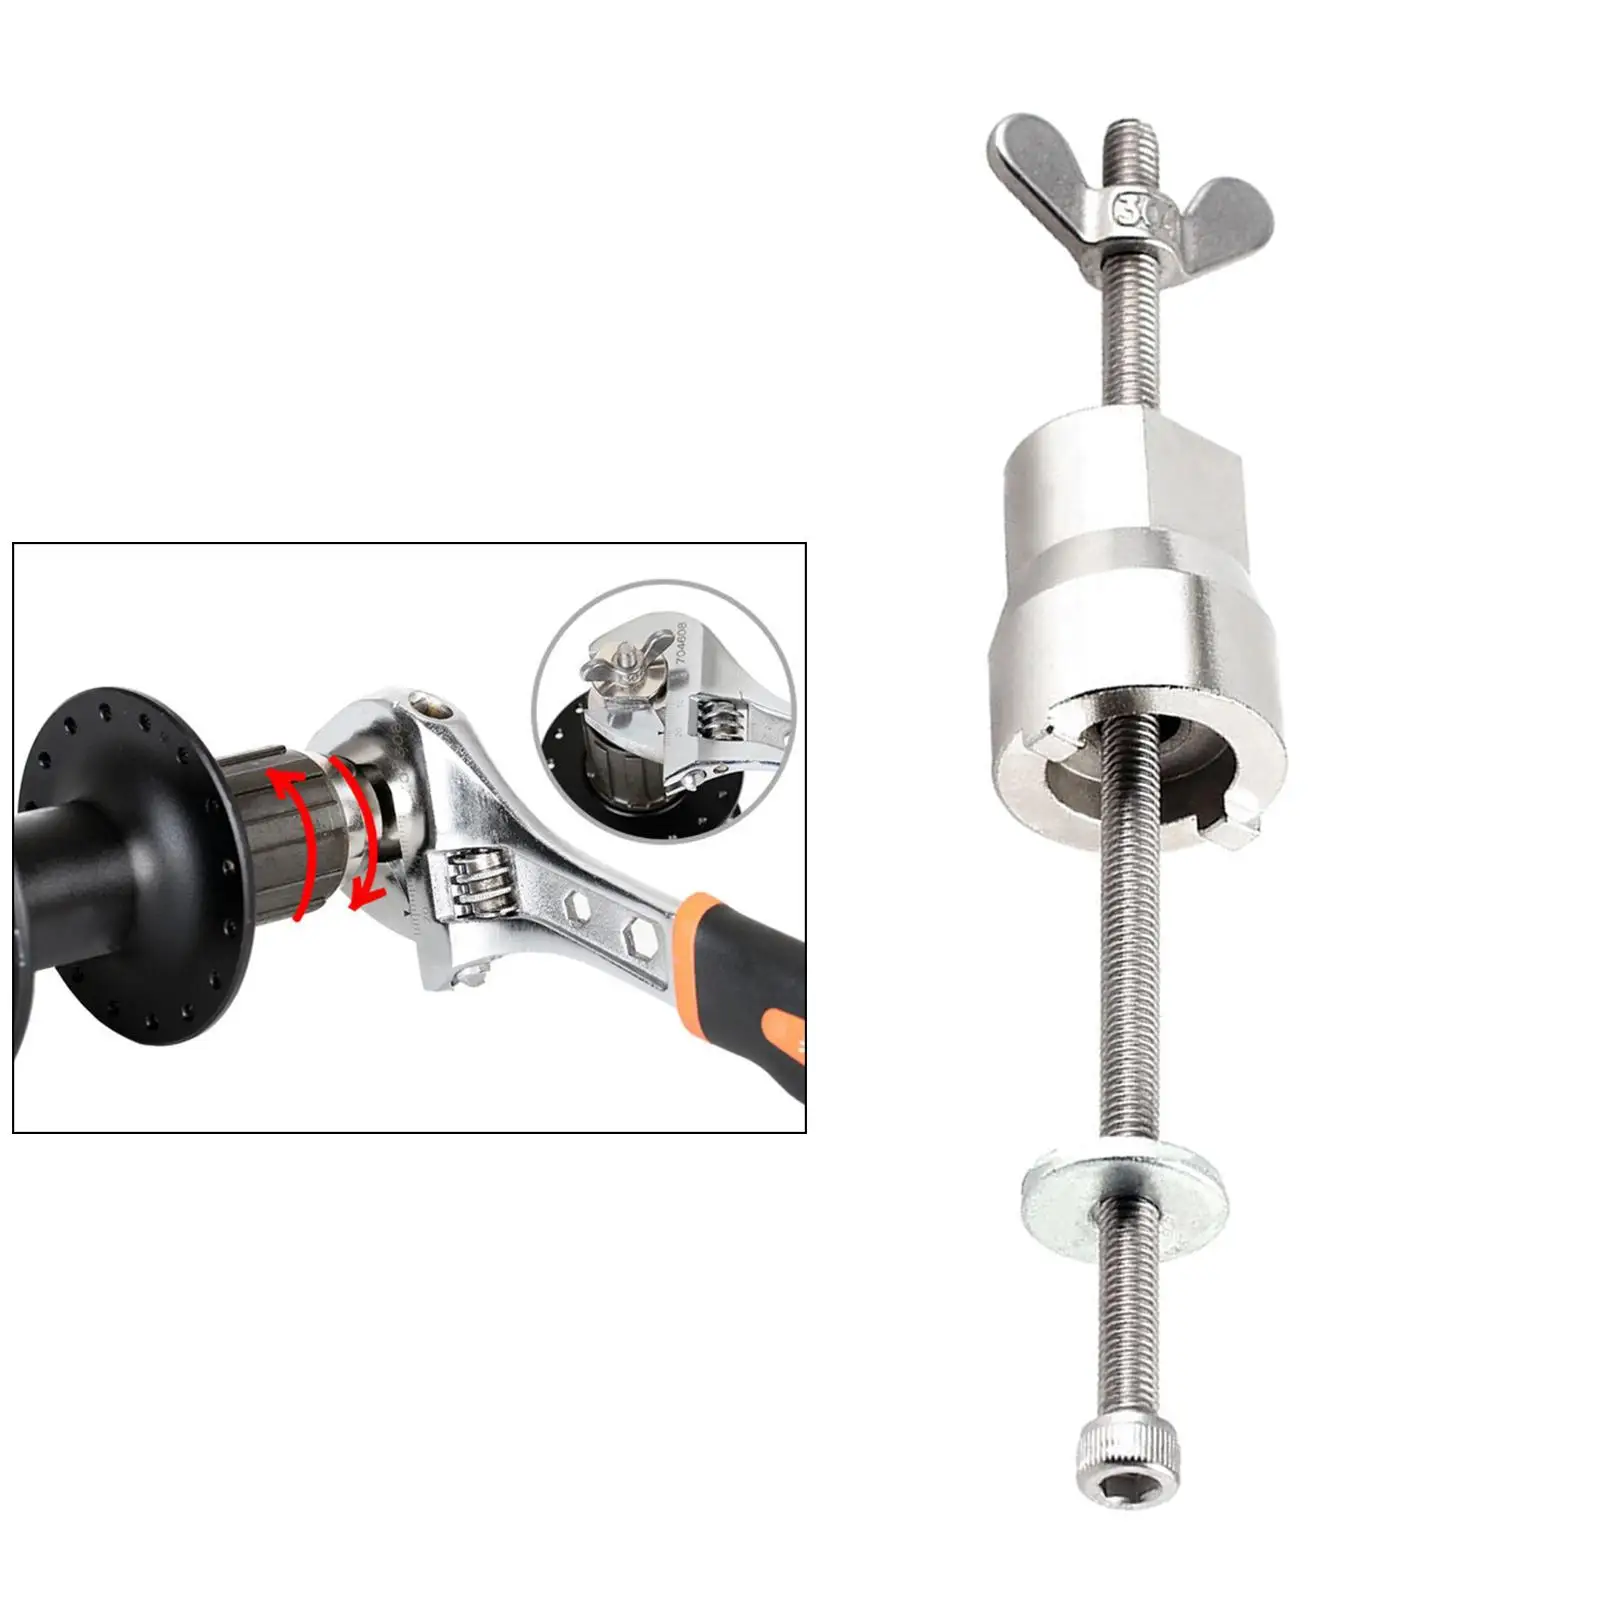 Professional Bike  Remover Removal Installer- won`t damage hub body, Cassette Hub Removal  Wrench